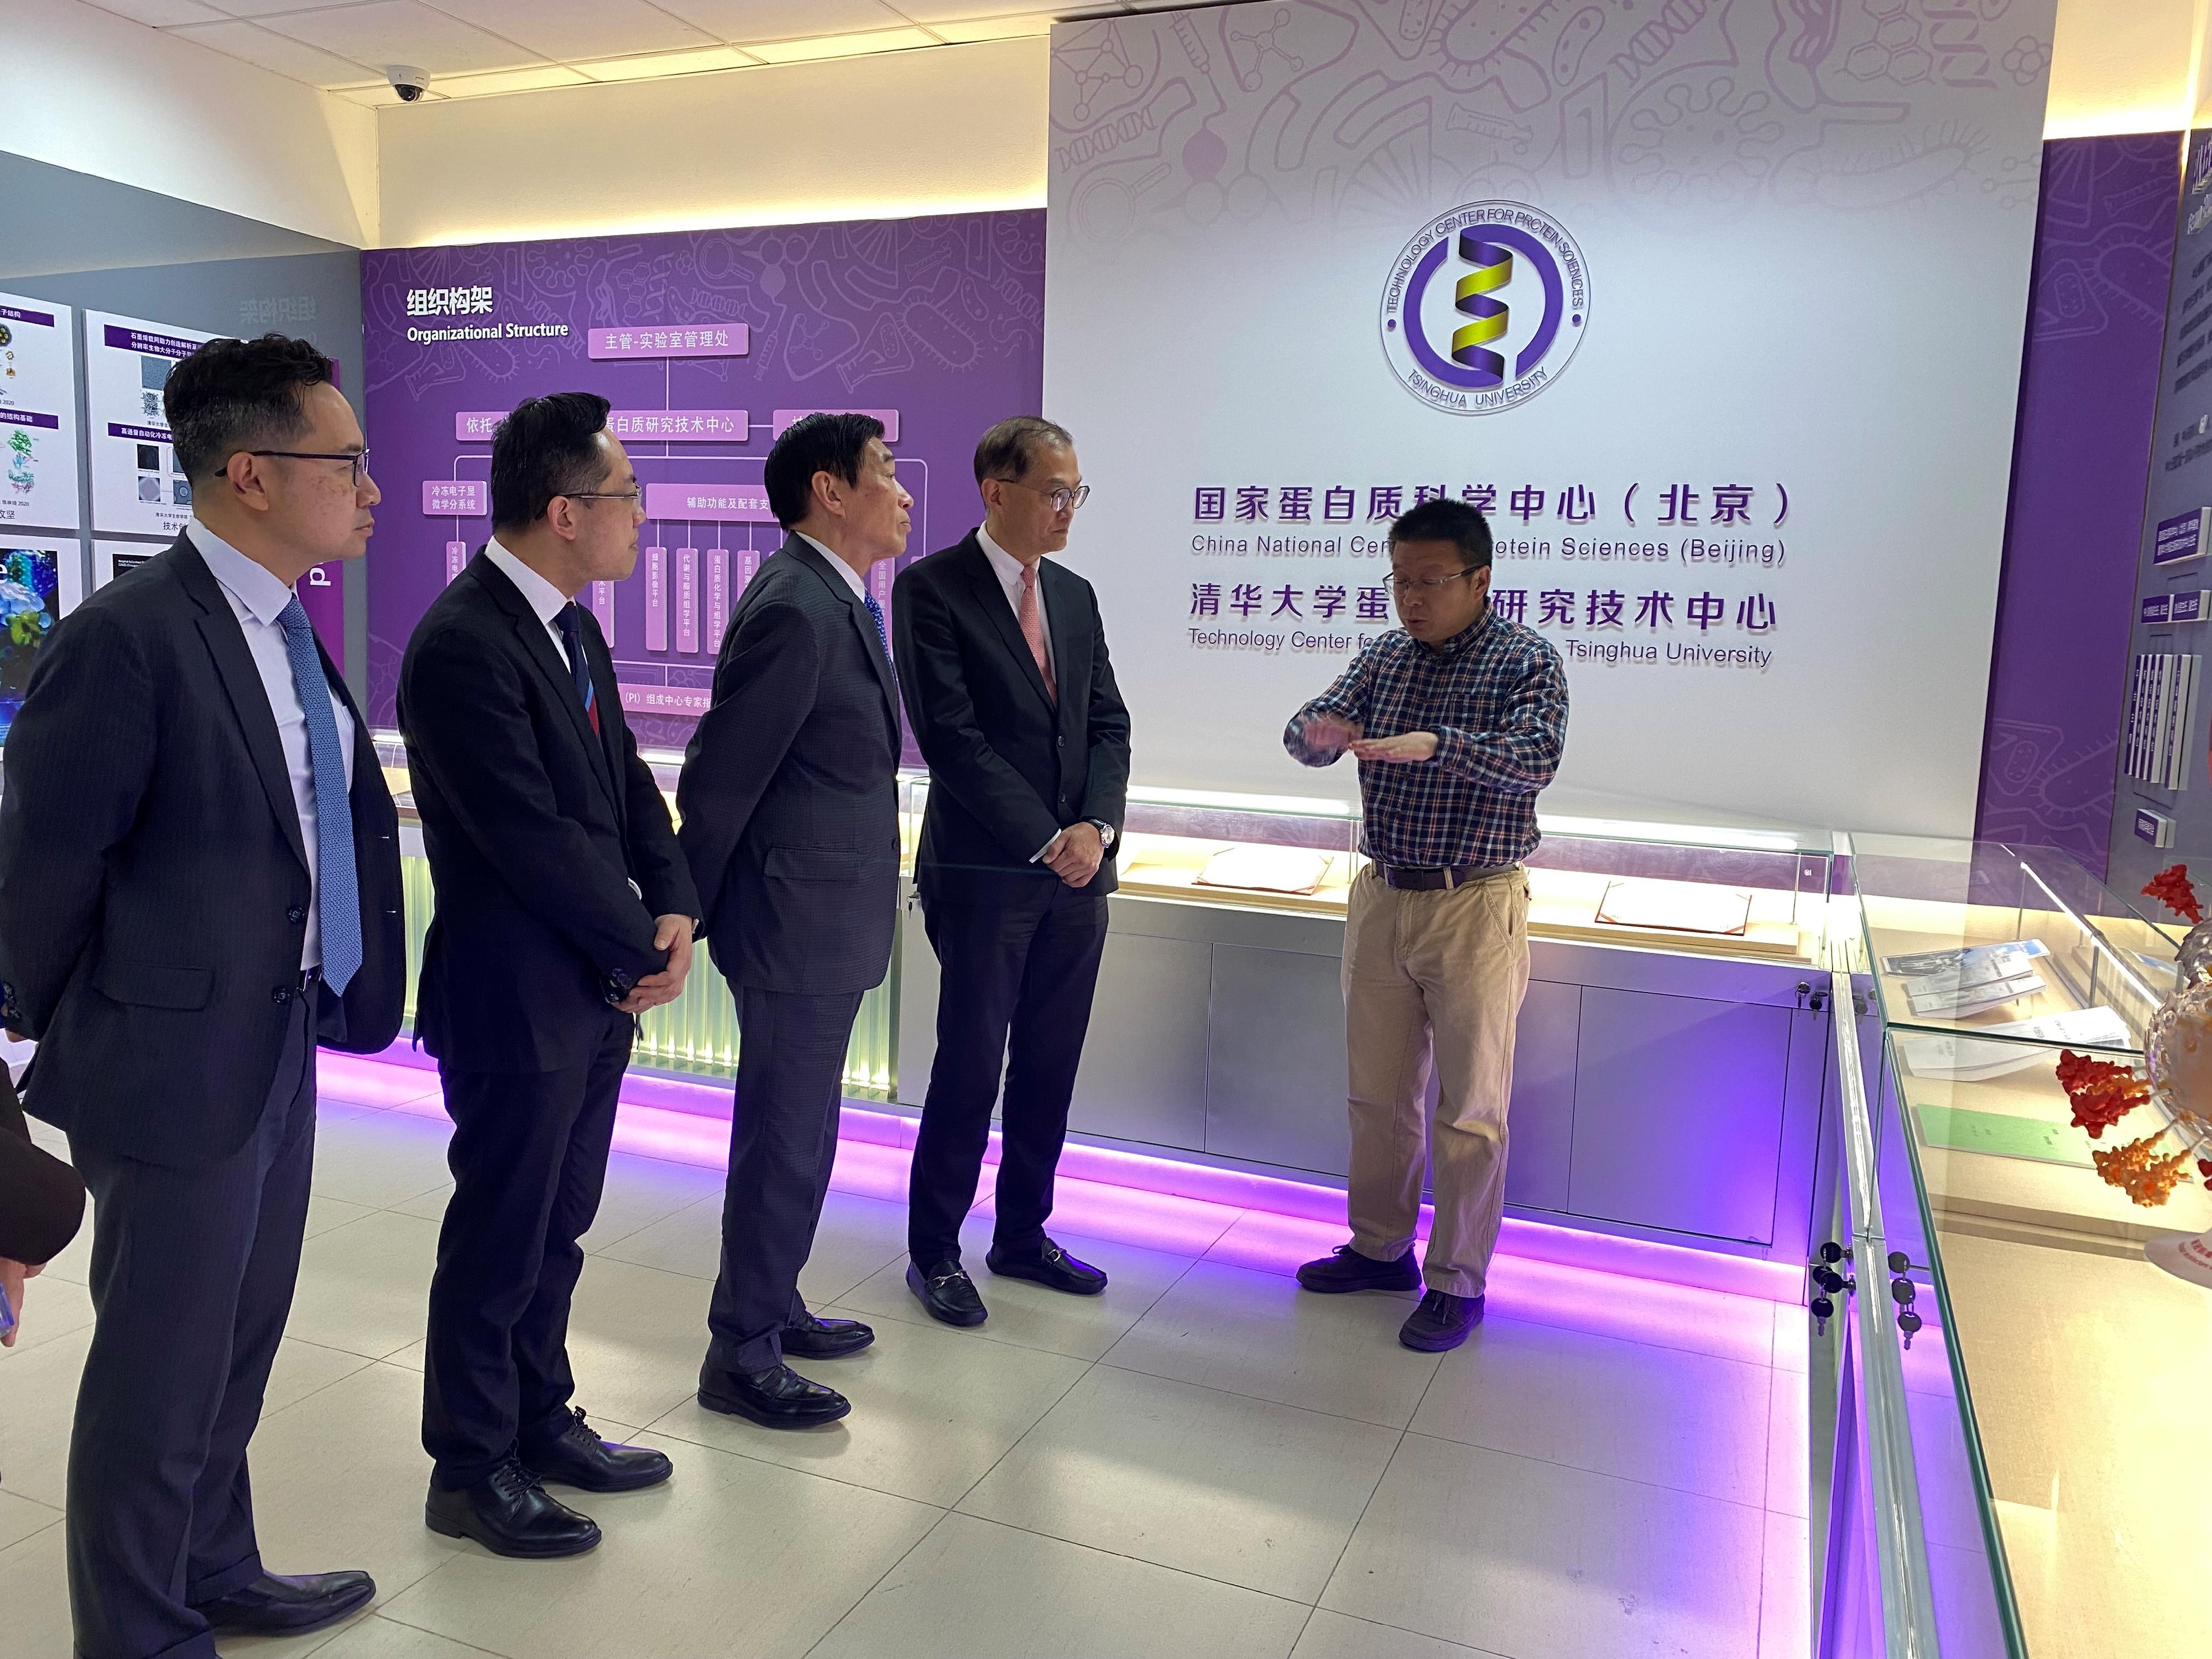 The Secretary for Health, Professor Lo Chung-mau, and his delegation visited the Technology Center for Protein Sciences at Tsinghua University today (March 17). Photo shows Professor Lo (fourth left); the Director of Health, Dr Ronald Lam (second left); Deputy Secretary for Health Mr Eddie Lee (first left); and the Chairman of the Hospital Authority, Mr Henry Fan (third left), listening to the staff introducing the background of the Technology Center.
